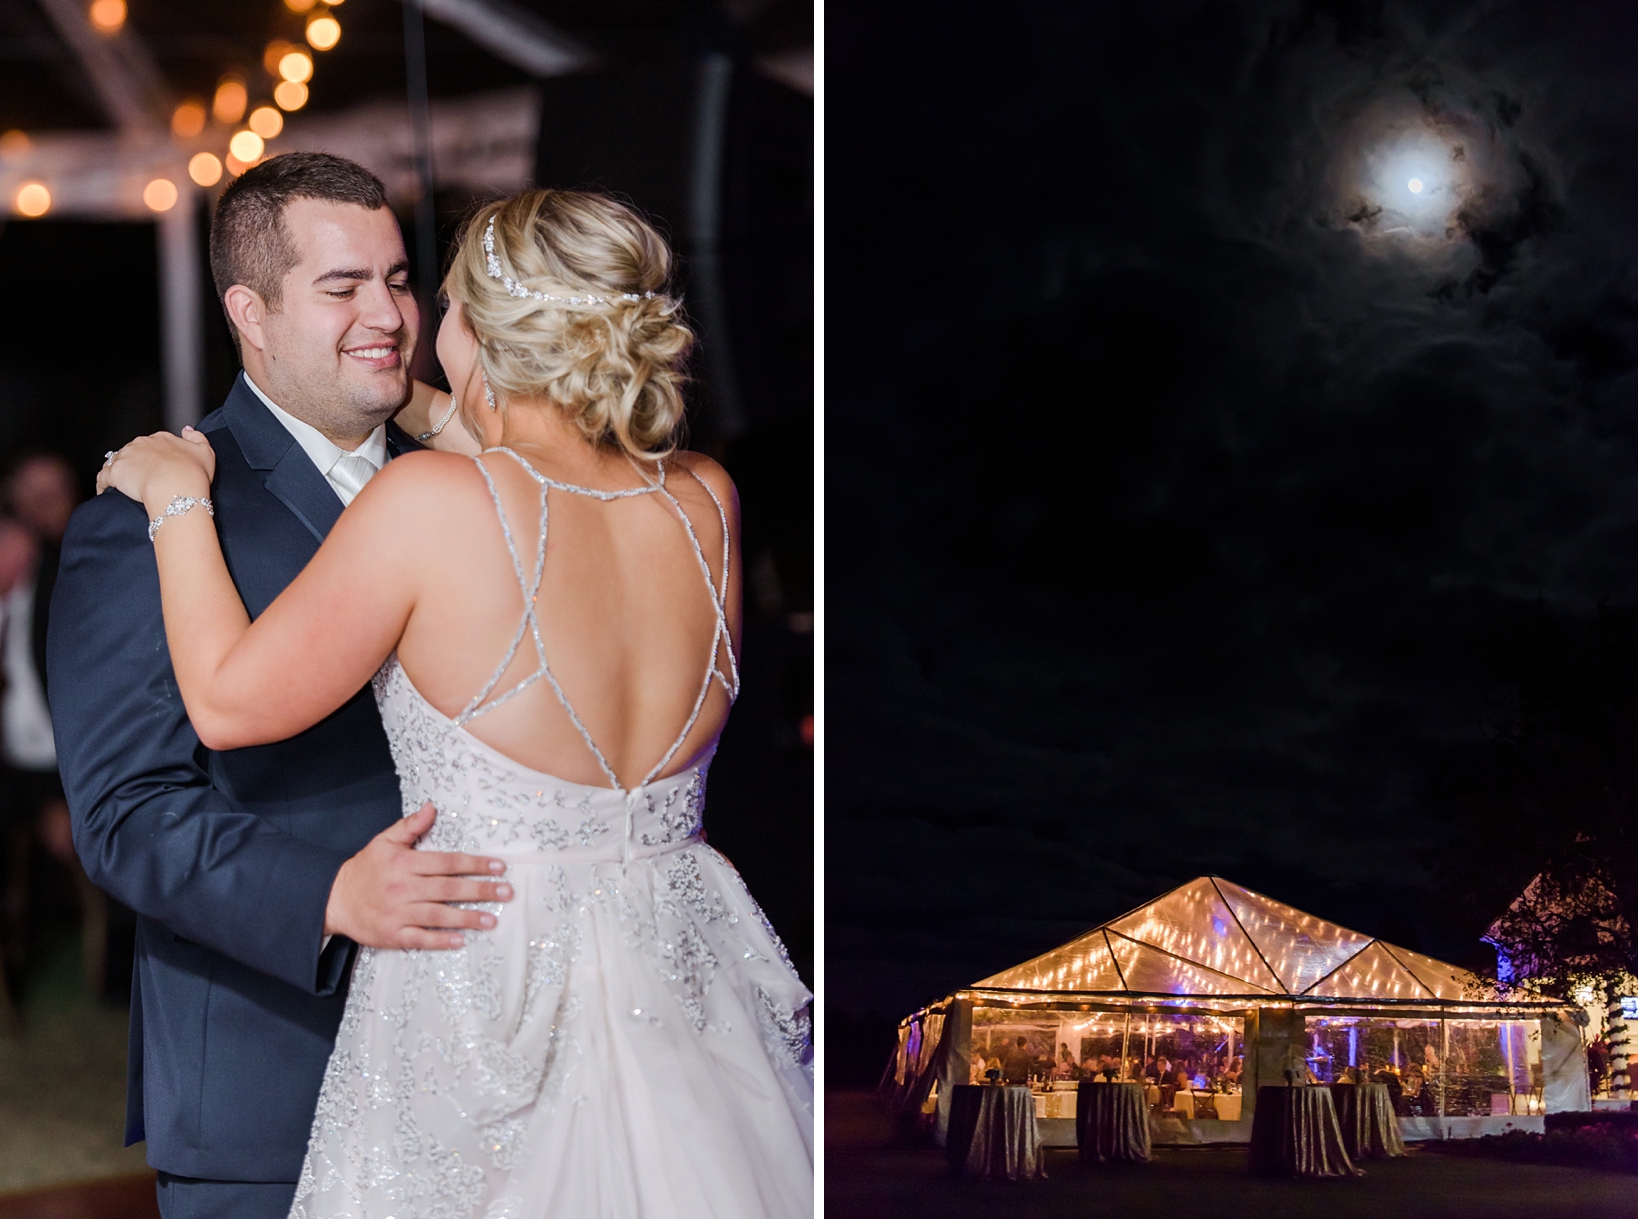 The Bride and Groom first dance and a shot of the reception tent under the full moon